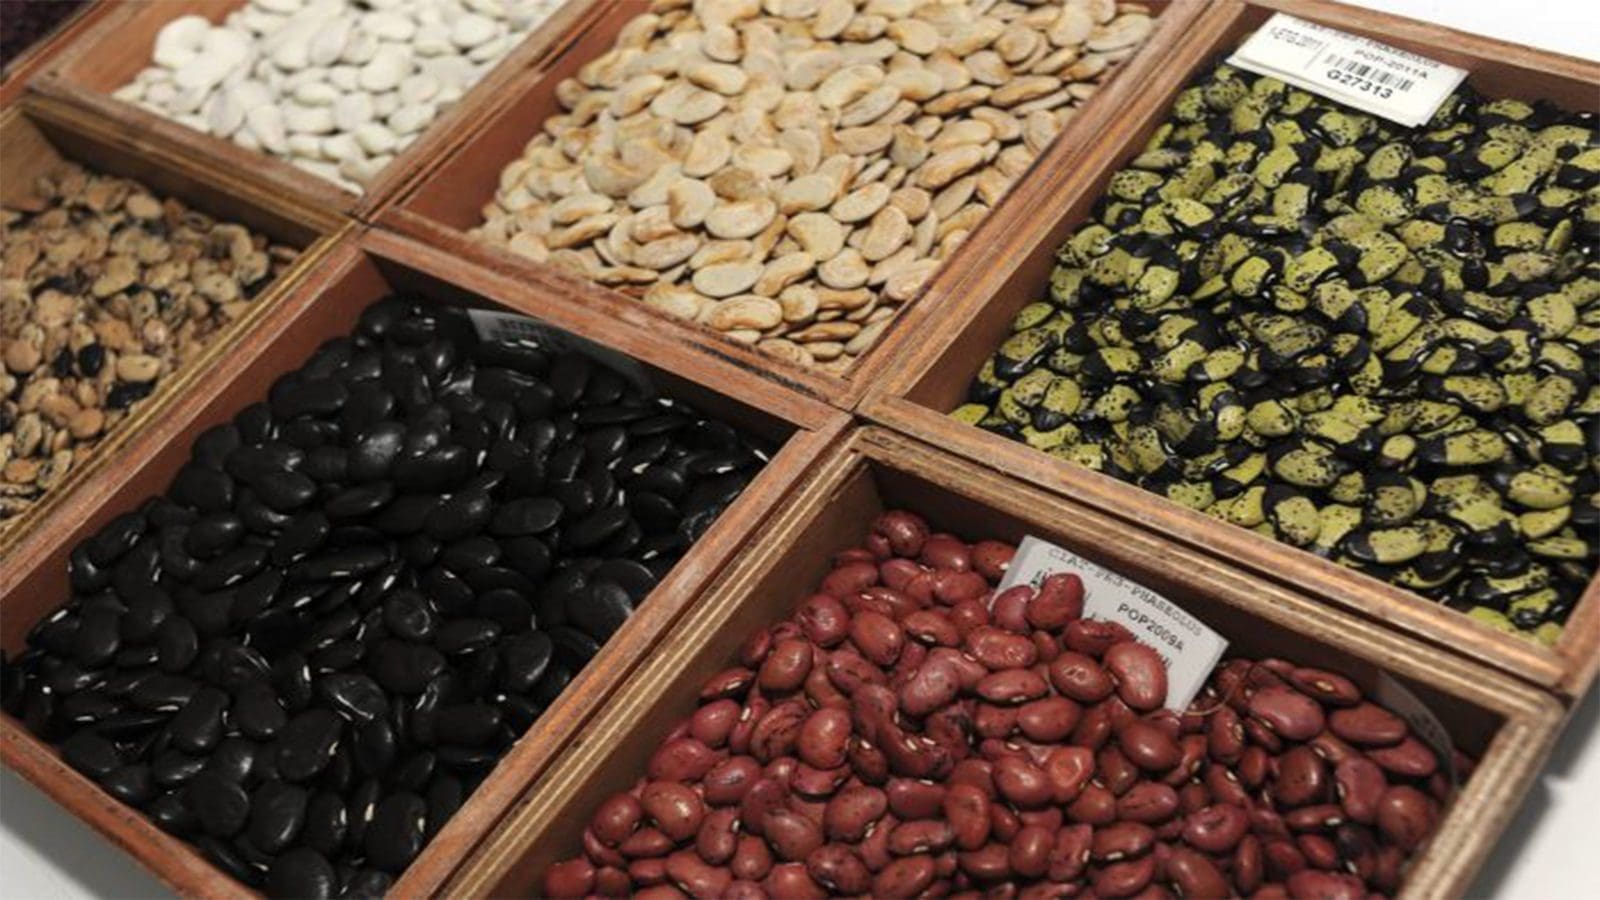 Benin approves establishment of a national entity to regulate seeds and plants sector